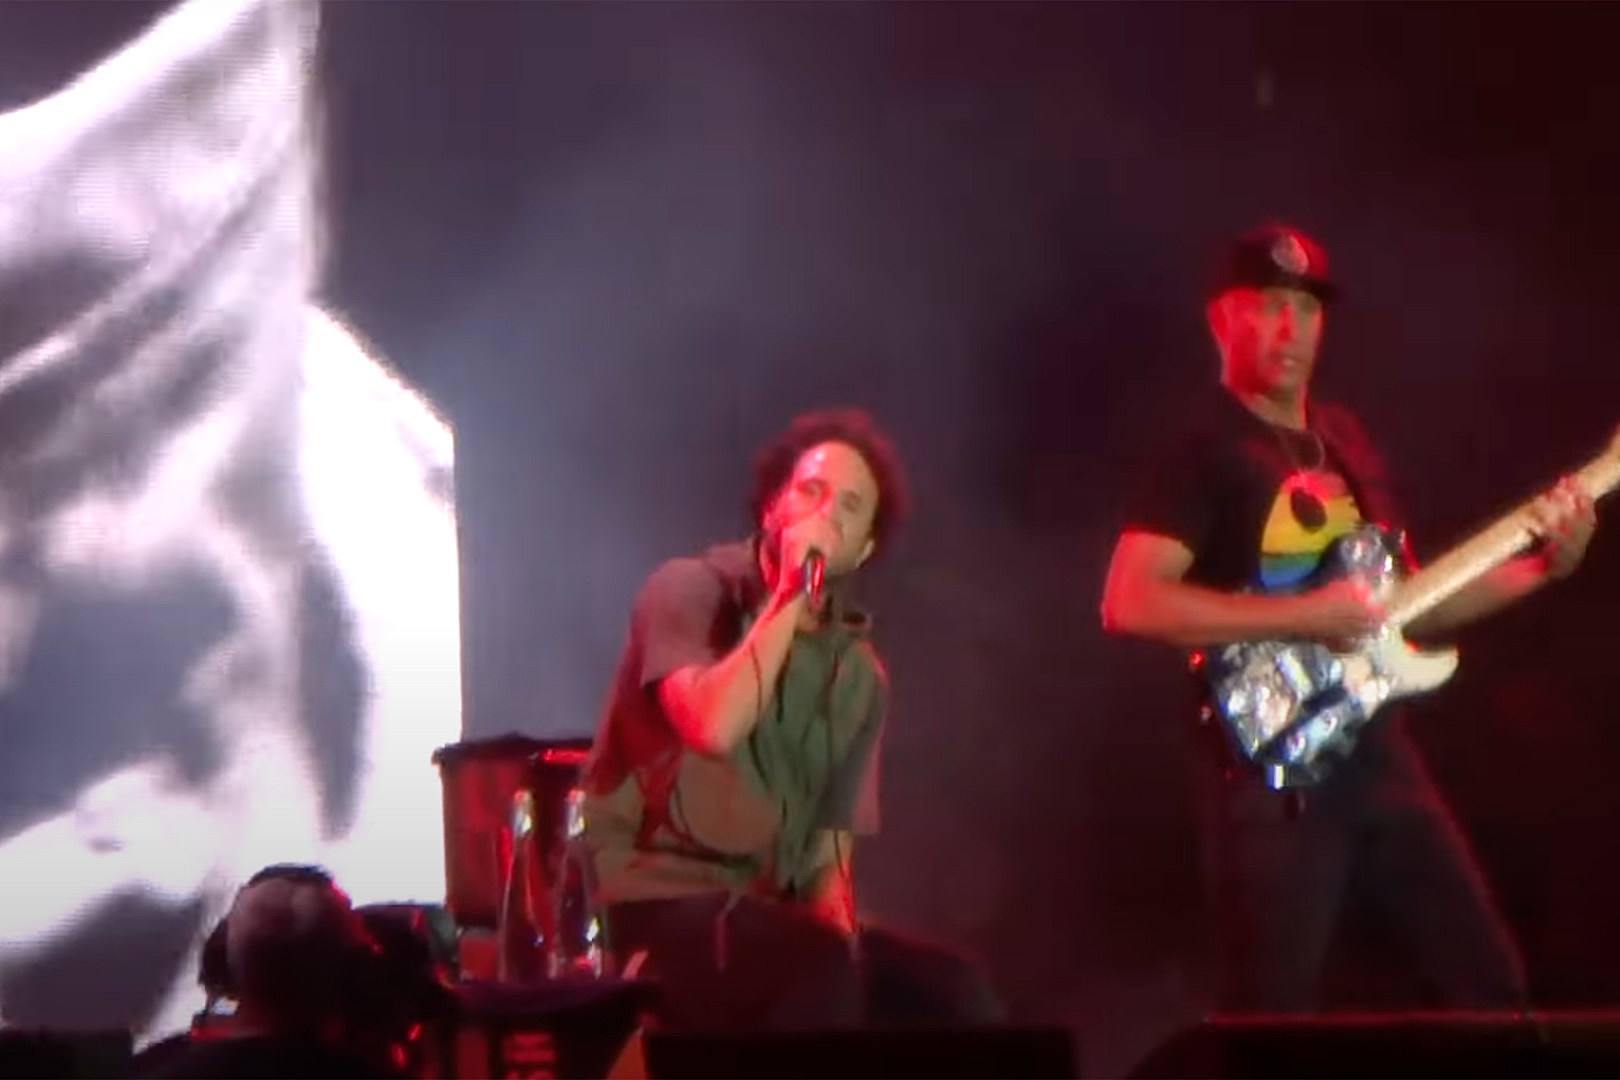 Watch Rage Against the Machine’s de la Rocha Play While Seated